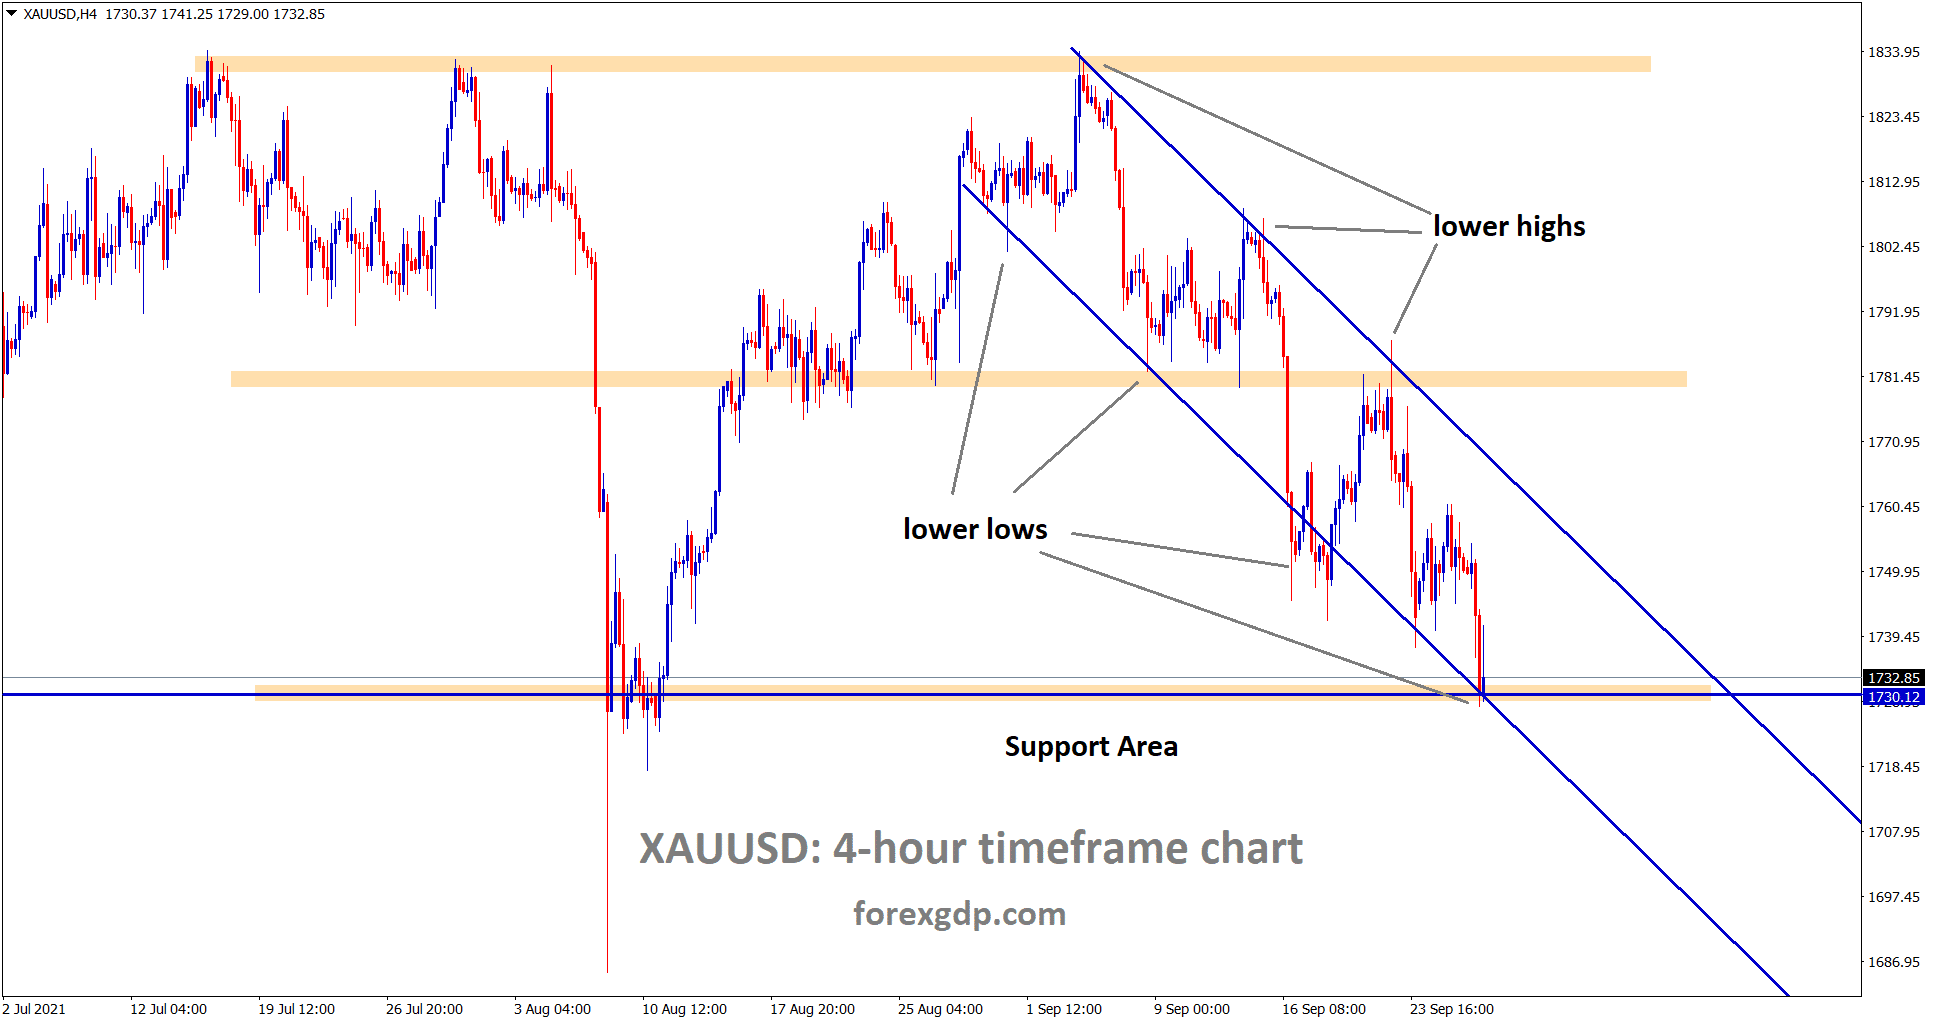 Gold has reached the horizontal support area and the lower low level of the descending channel